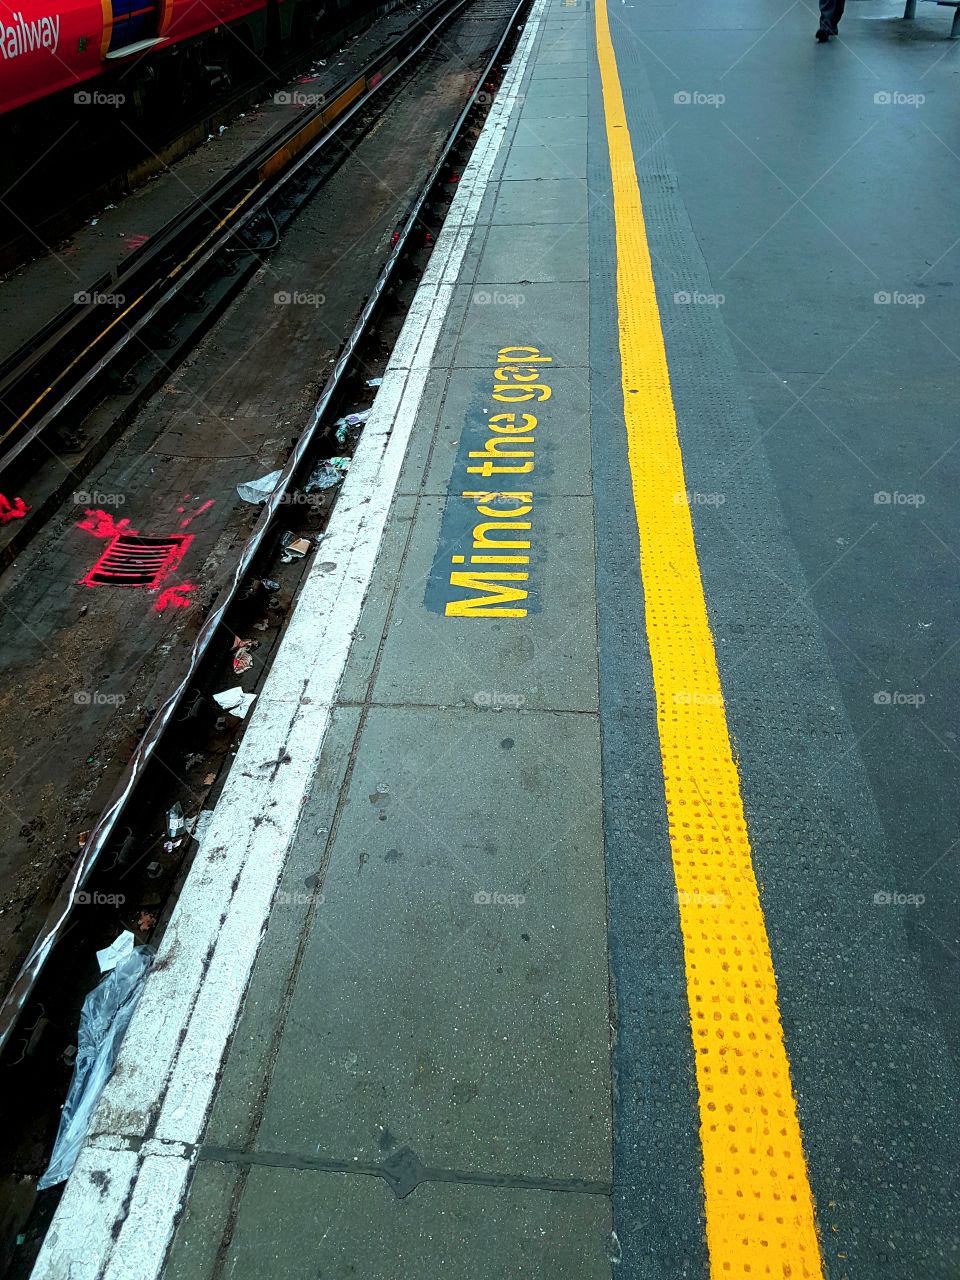 Mind the gap between the train and the platform edge.